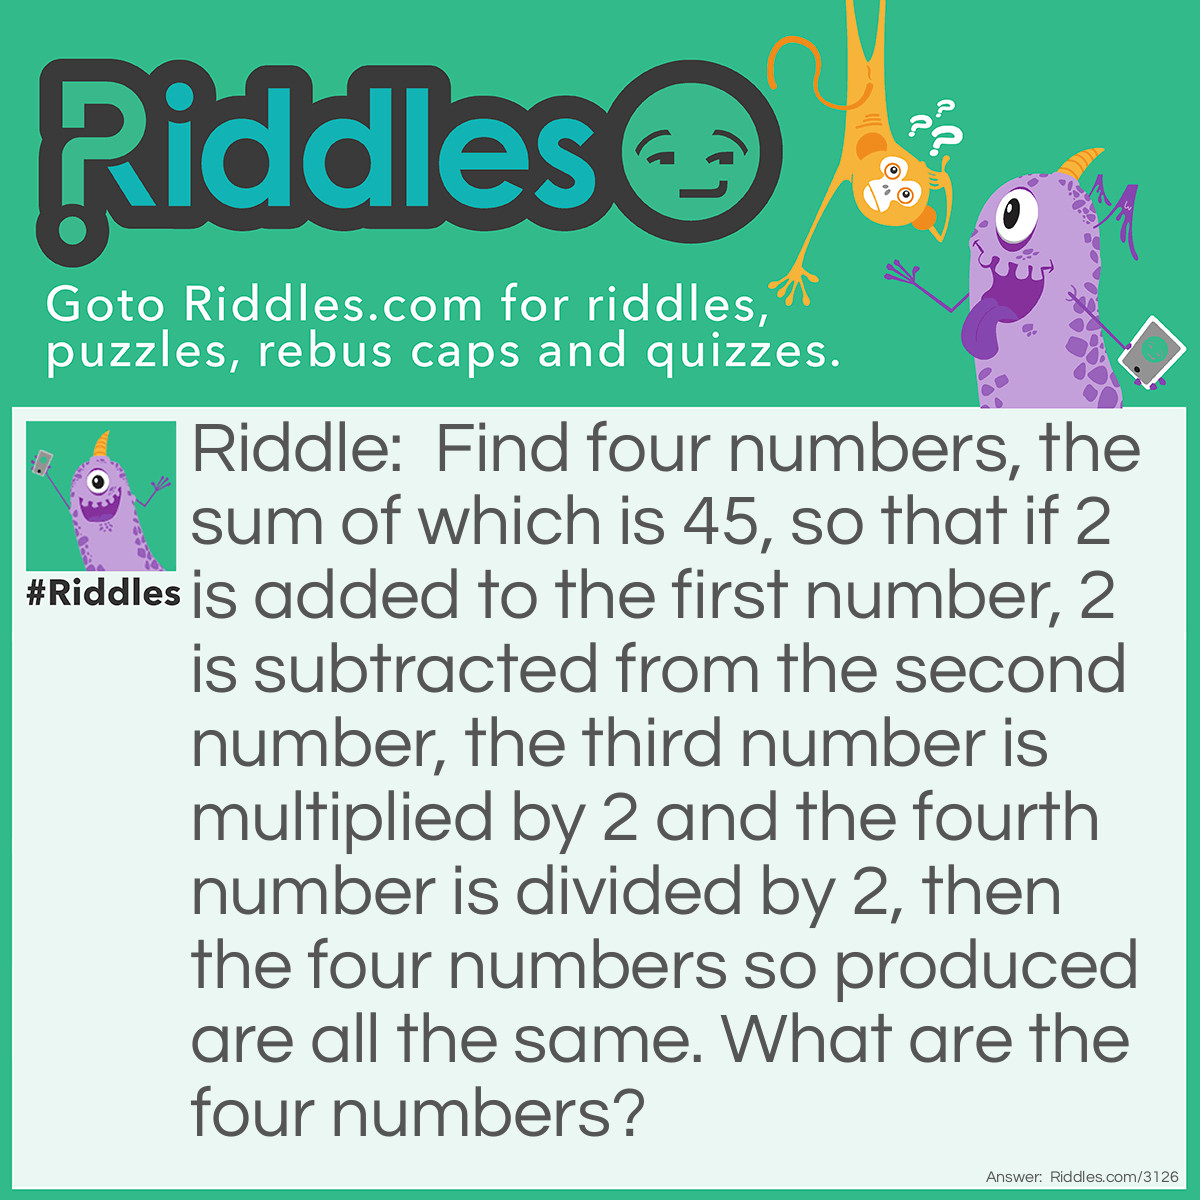 Riddle: Find four numbers, the sum of which is 45, so that if 2 is added to the first number, 2 is subtracted from the second number, the third number is multiplied by 2 and the fourth number is divided by 2, then the four numbers so produced are all the same. What are the four numbers? Answer:  8 + 2 = 10
12 - 2 = 10
  5 x 2 = 10
<span style="text-decoration: underline;">20 ÷ 2 = 10</span>45